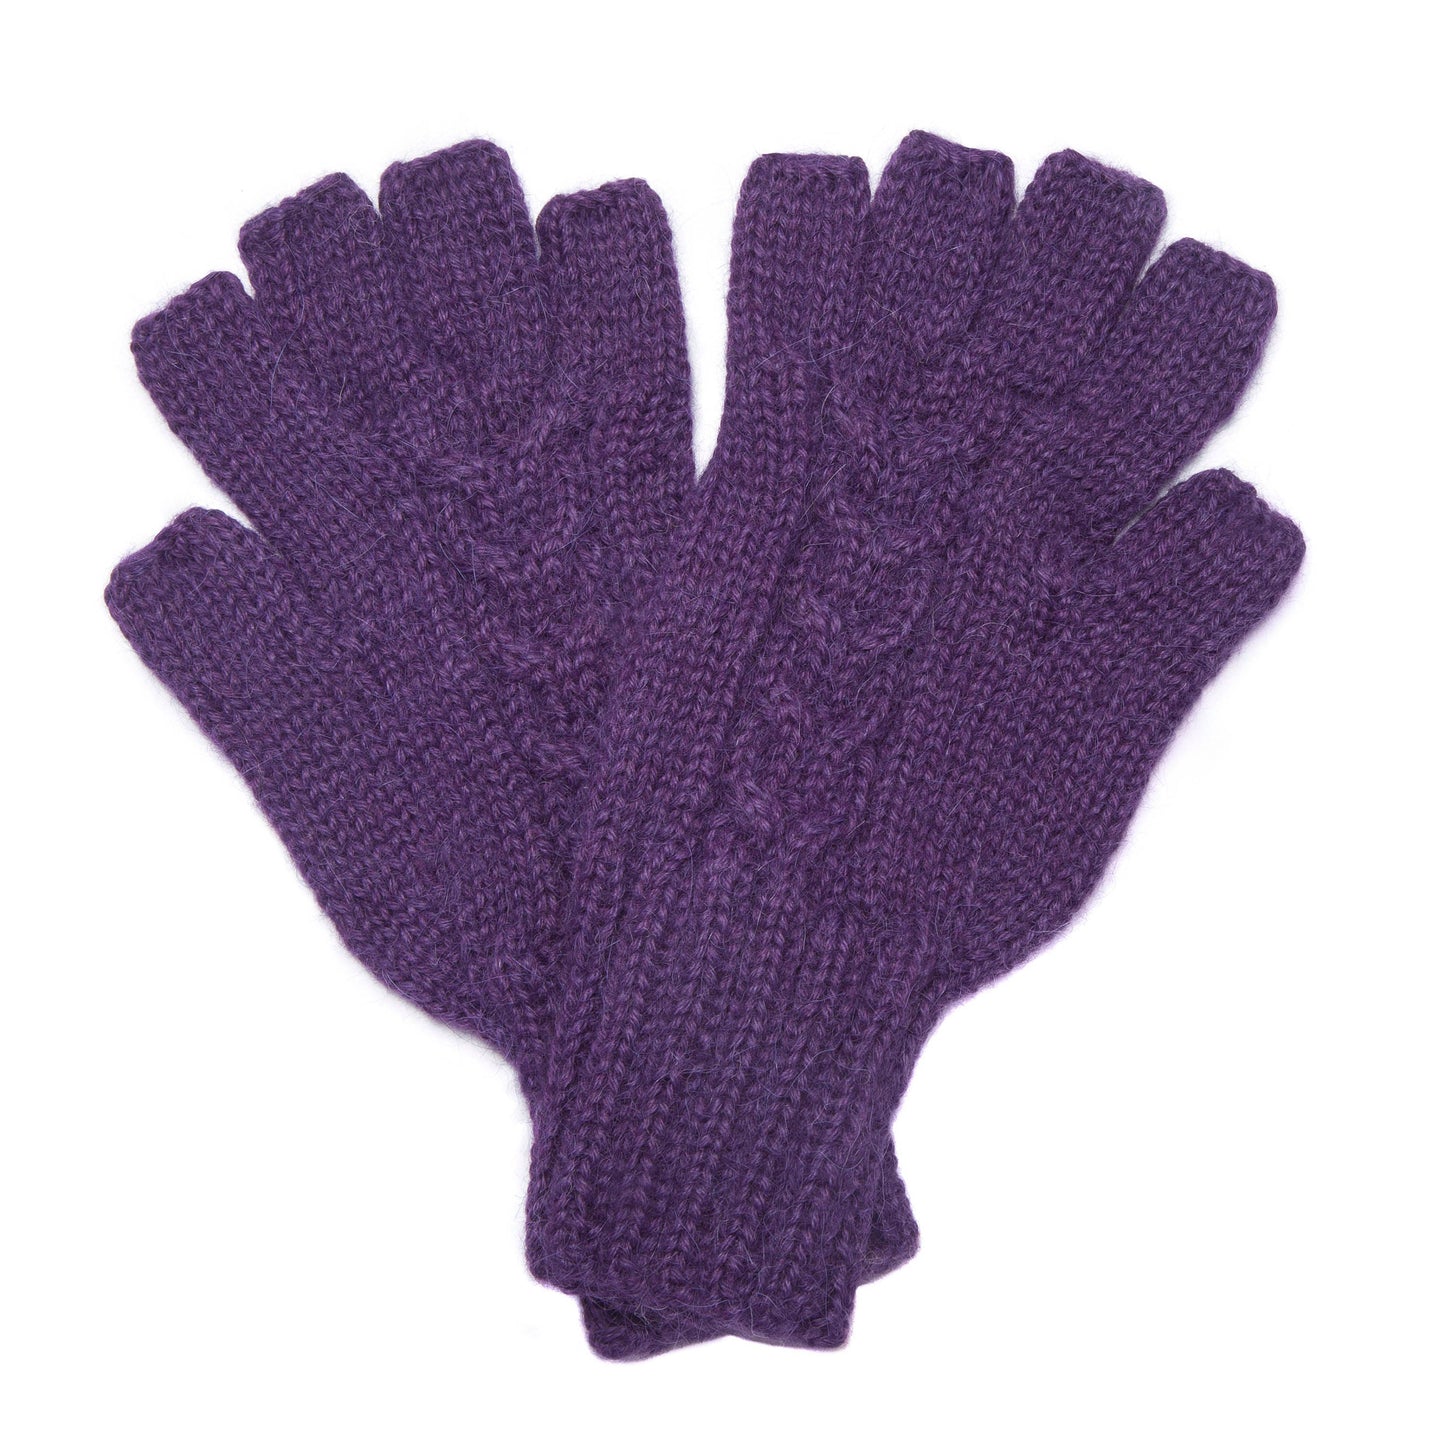 Gloves, fingerless, 'half finger', 100% alpaca wool, Hand knitted, warm winter mittens, Fair trade, Ethical gift, plastic free, eco knit